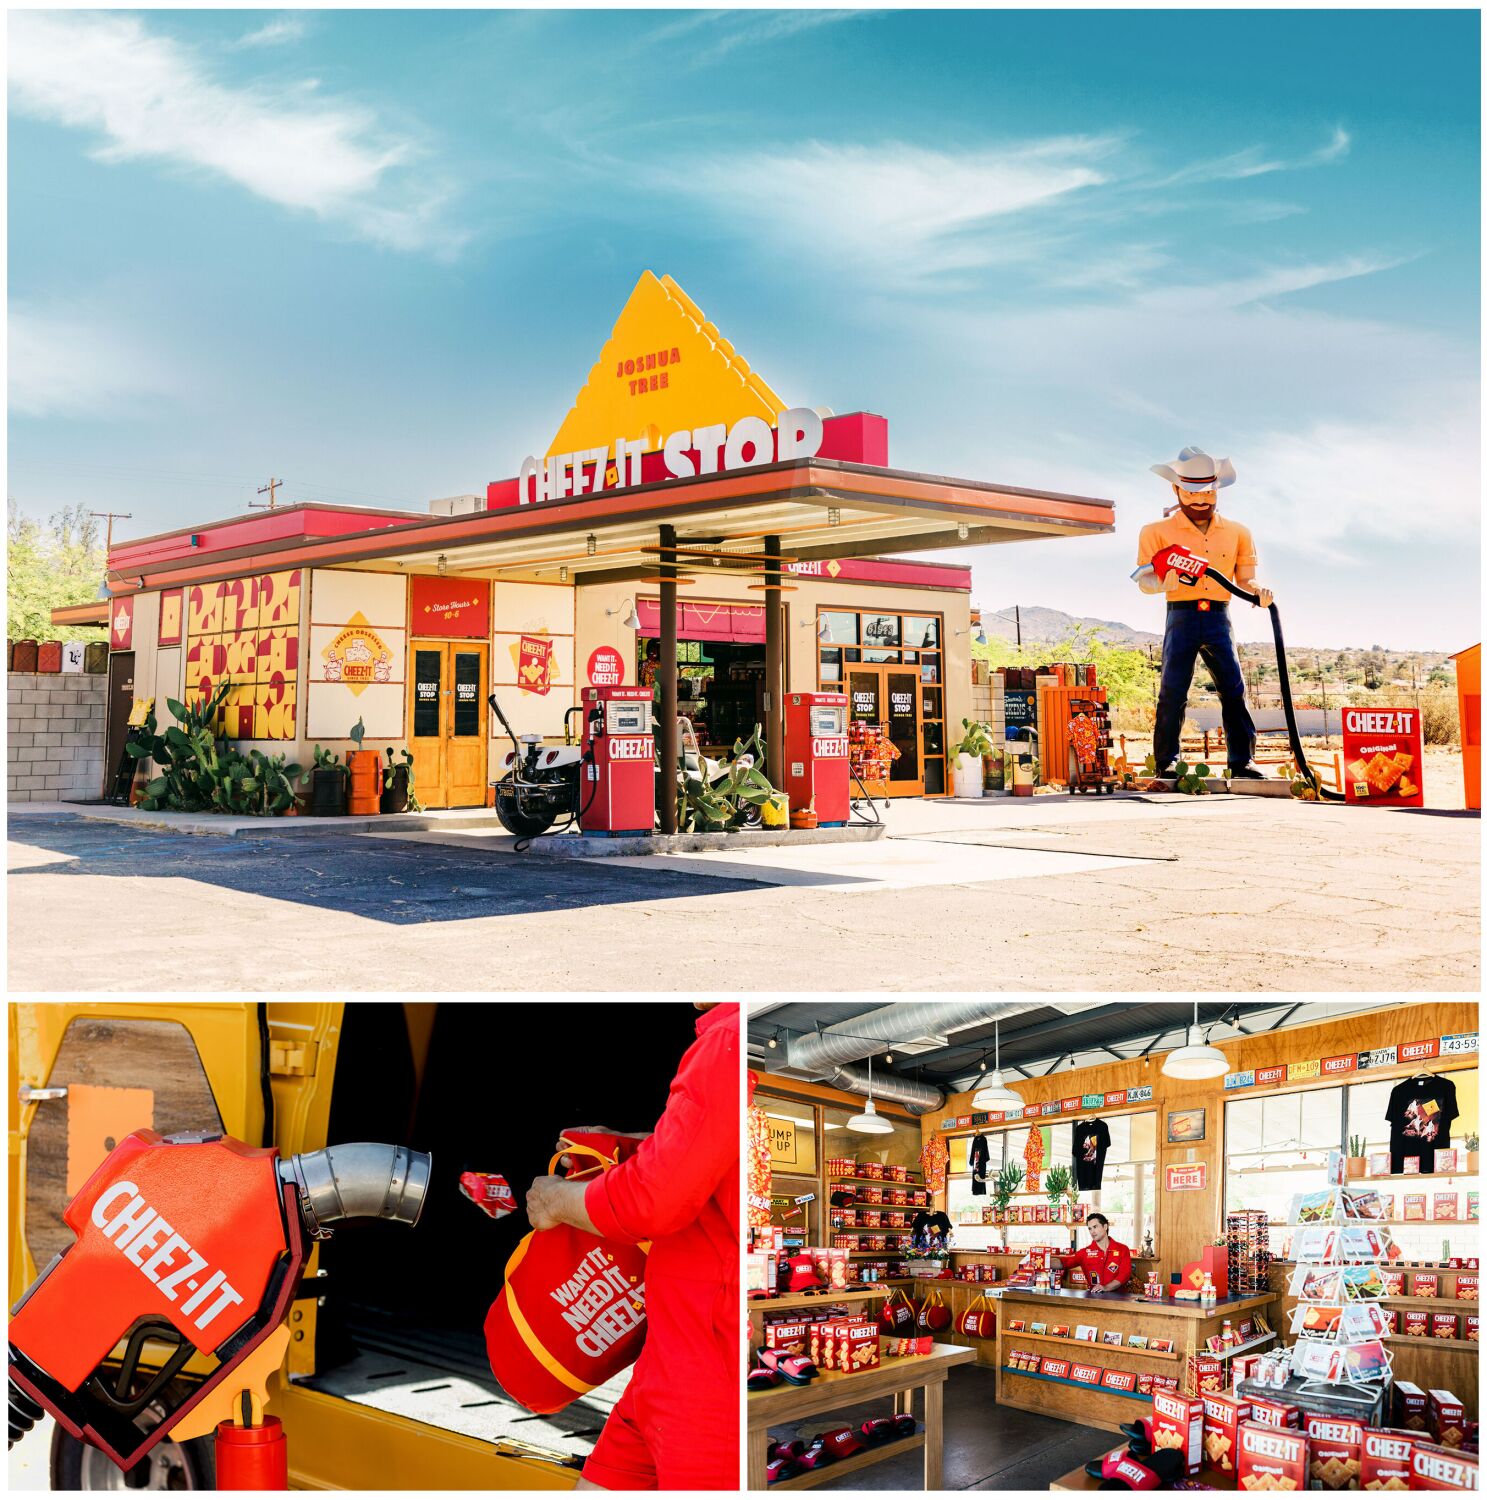 Look for the giant Cheez-It in the sky: Pop-up takes over Joshua Tree gas station